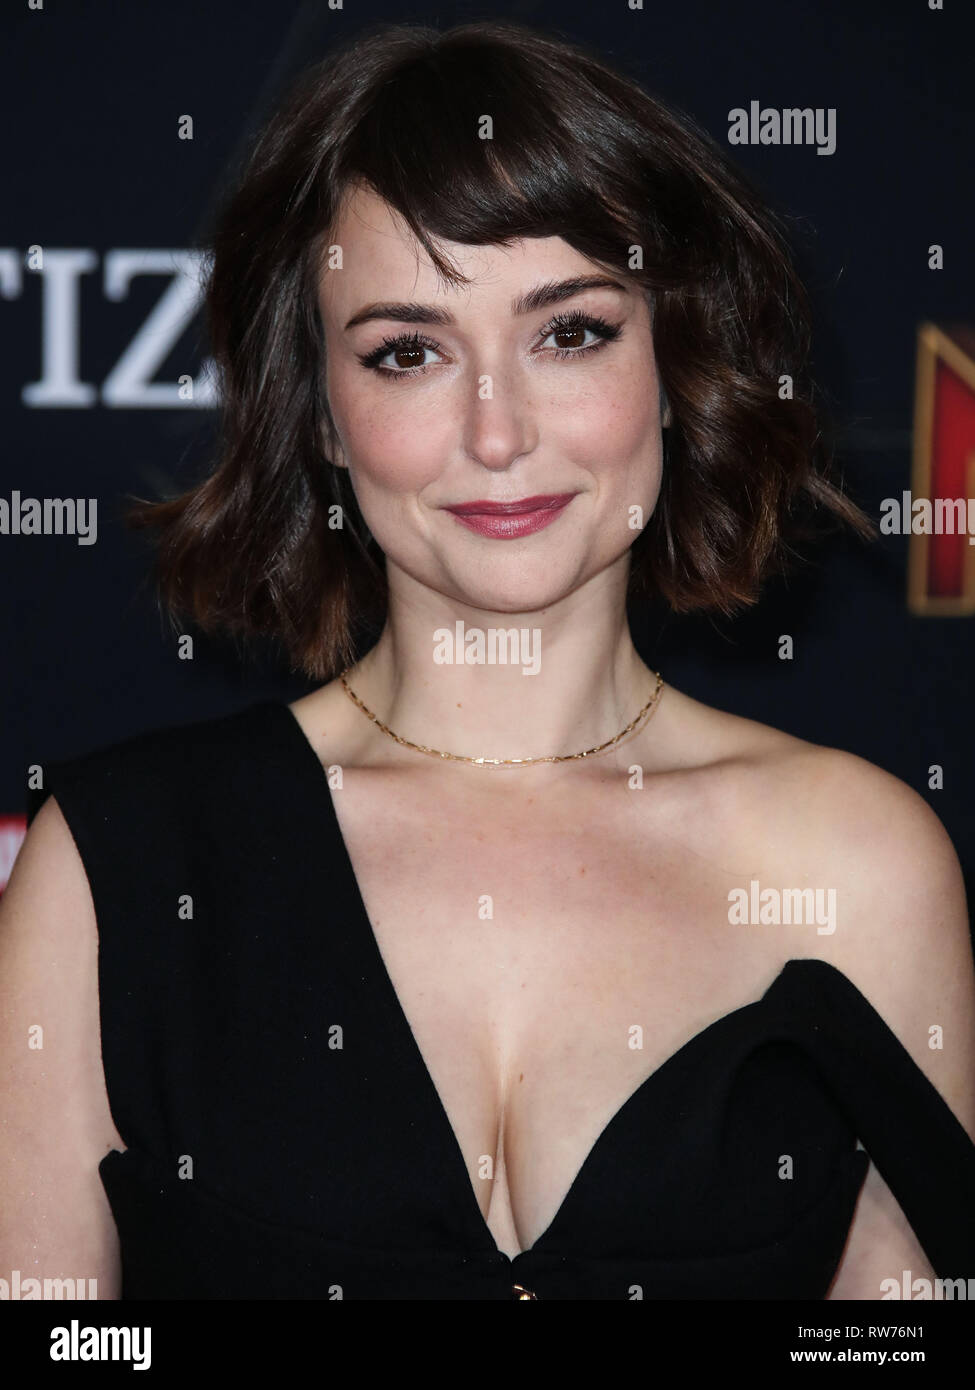 HOLLYWOOD, LOS ANGELES, CA, USA - MARCH 04: Actress Milana Vayntrub arrives at the World Premiere Of Marvel Studios 'Captain Marvel' held at the El Capitan Theatre on March 4, 2019 in Hollywood, Los Angeles, California, United States. (Photo by Xavier Collin/Image Press Agency) Stock Photo